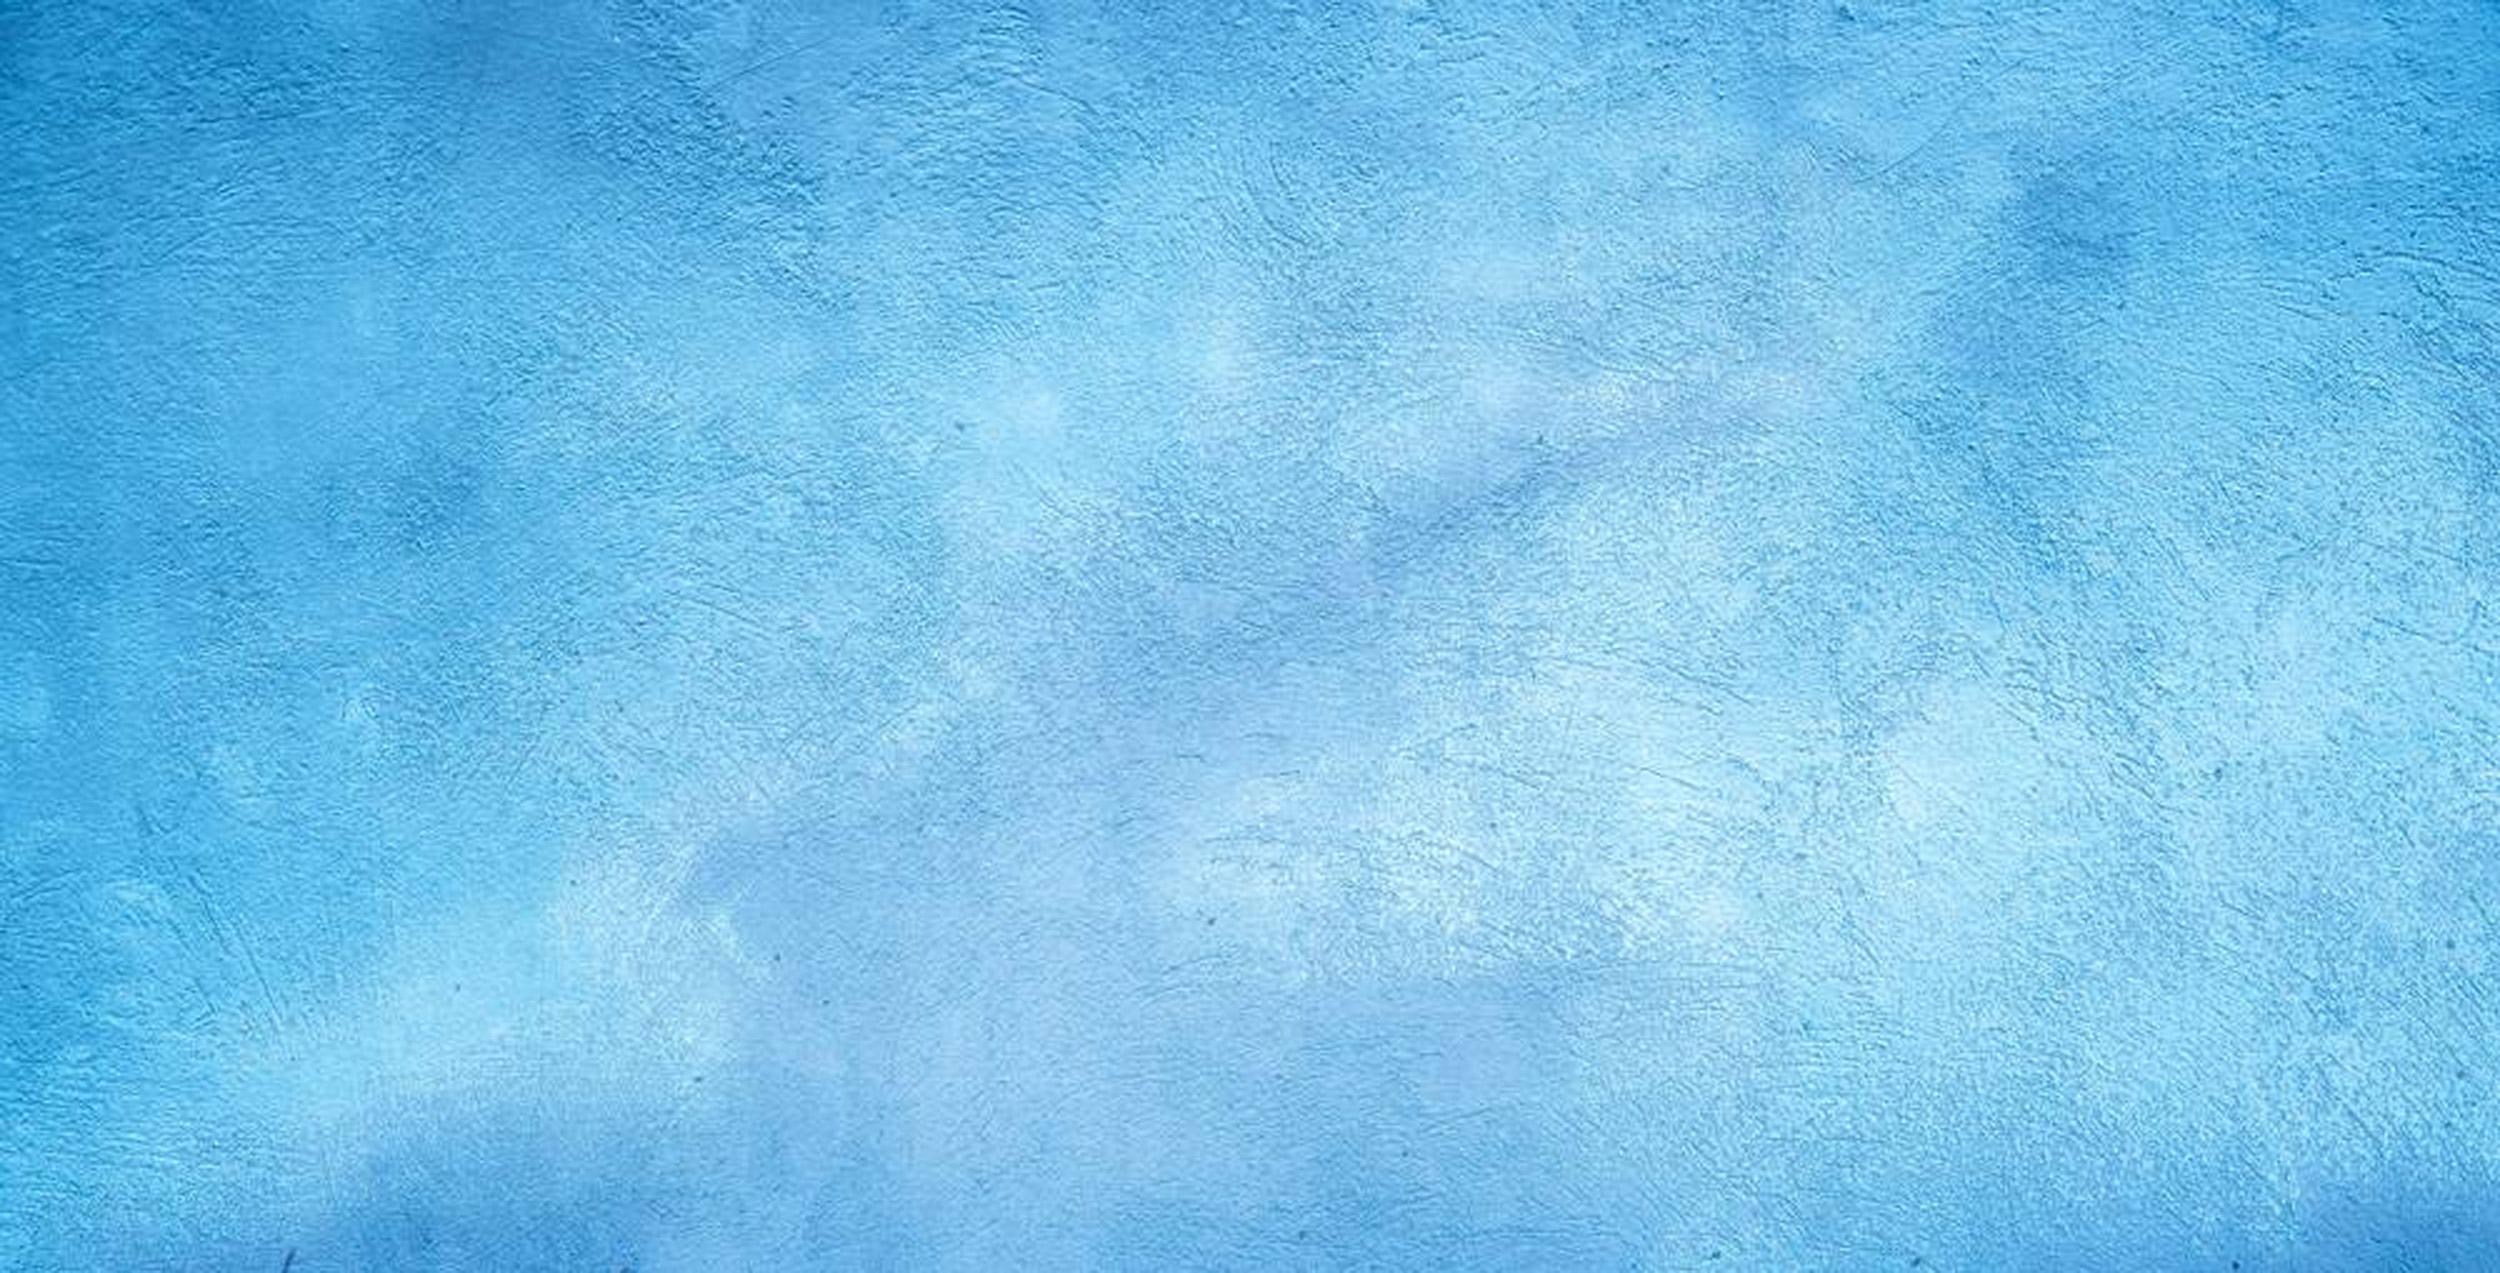  Yeele 4x4ft Solid Color Blurry Light Blue Background